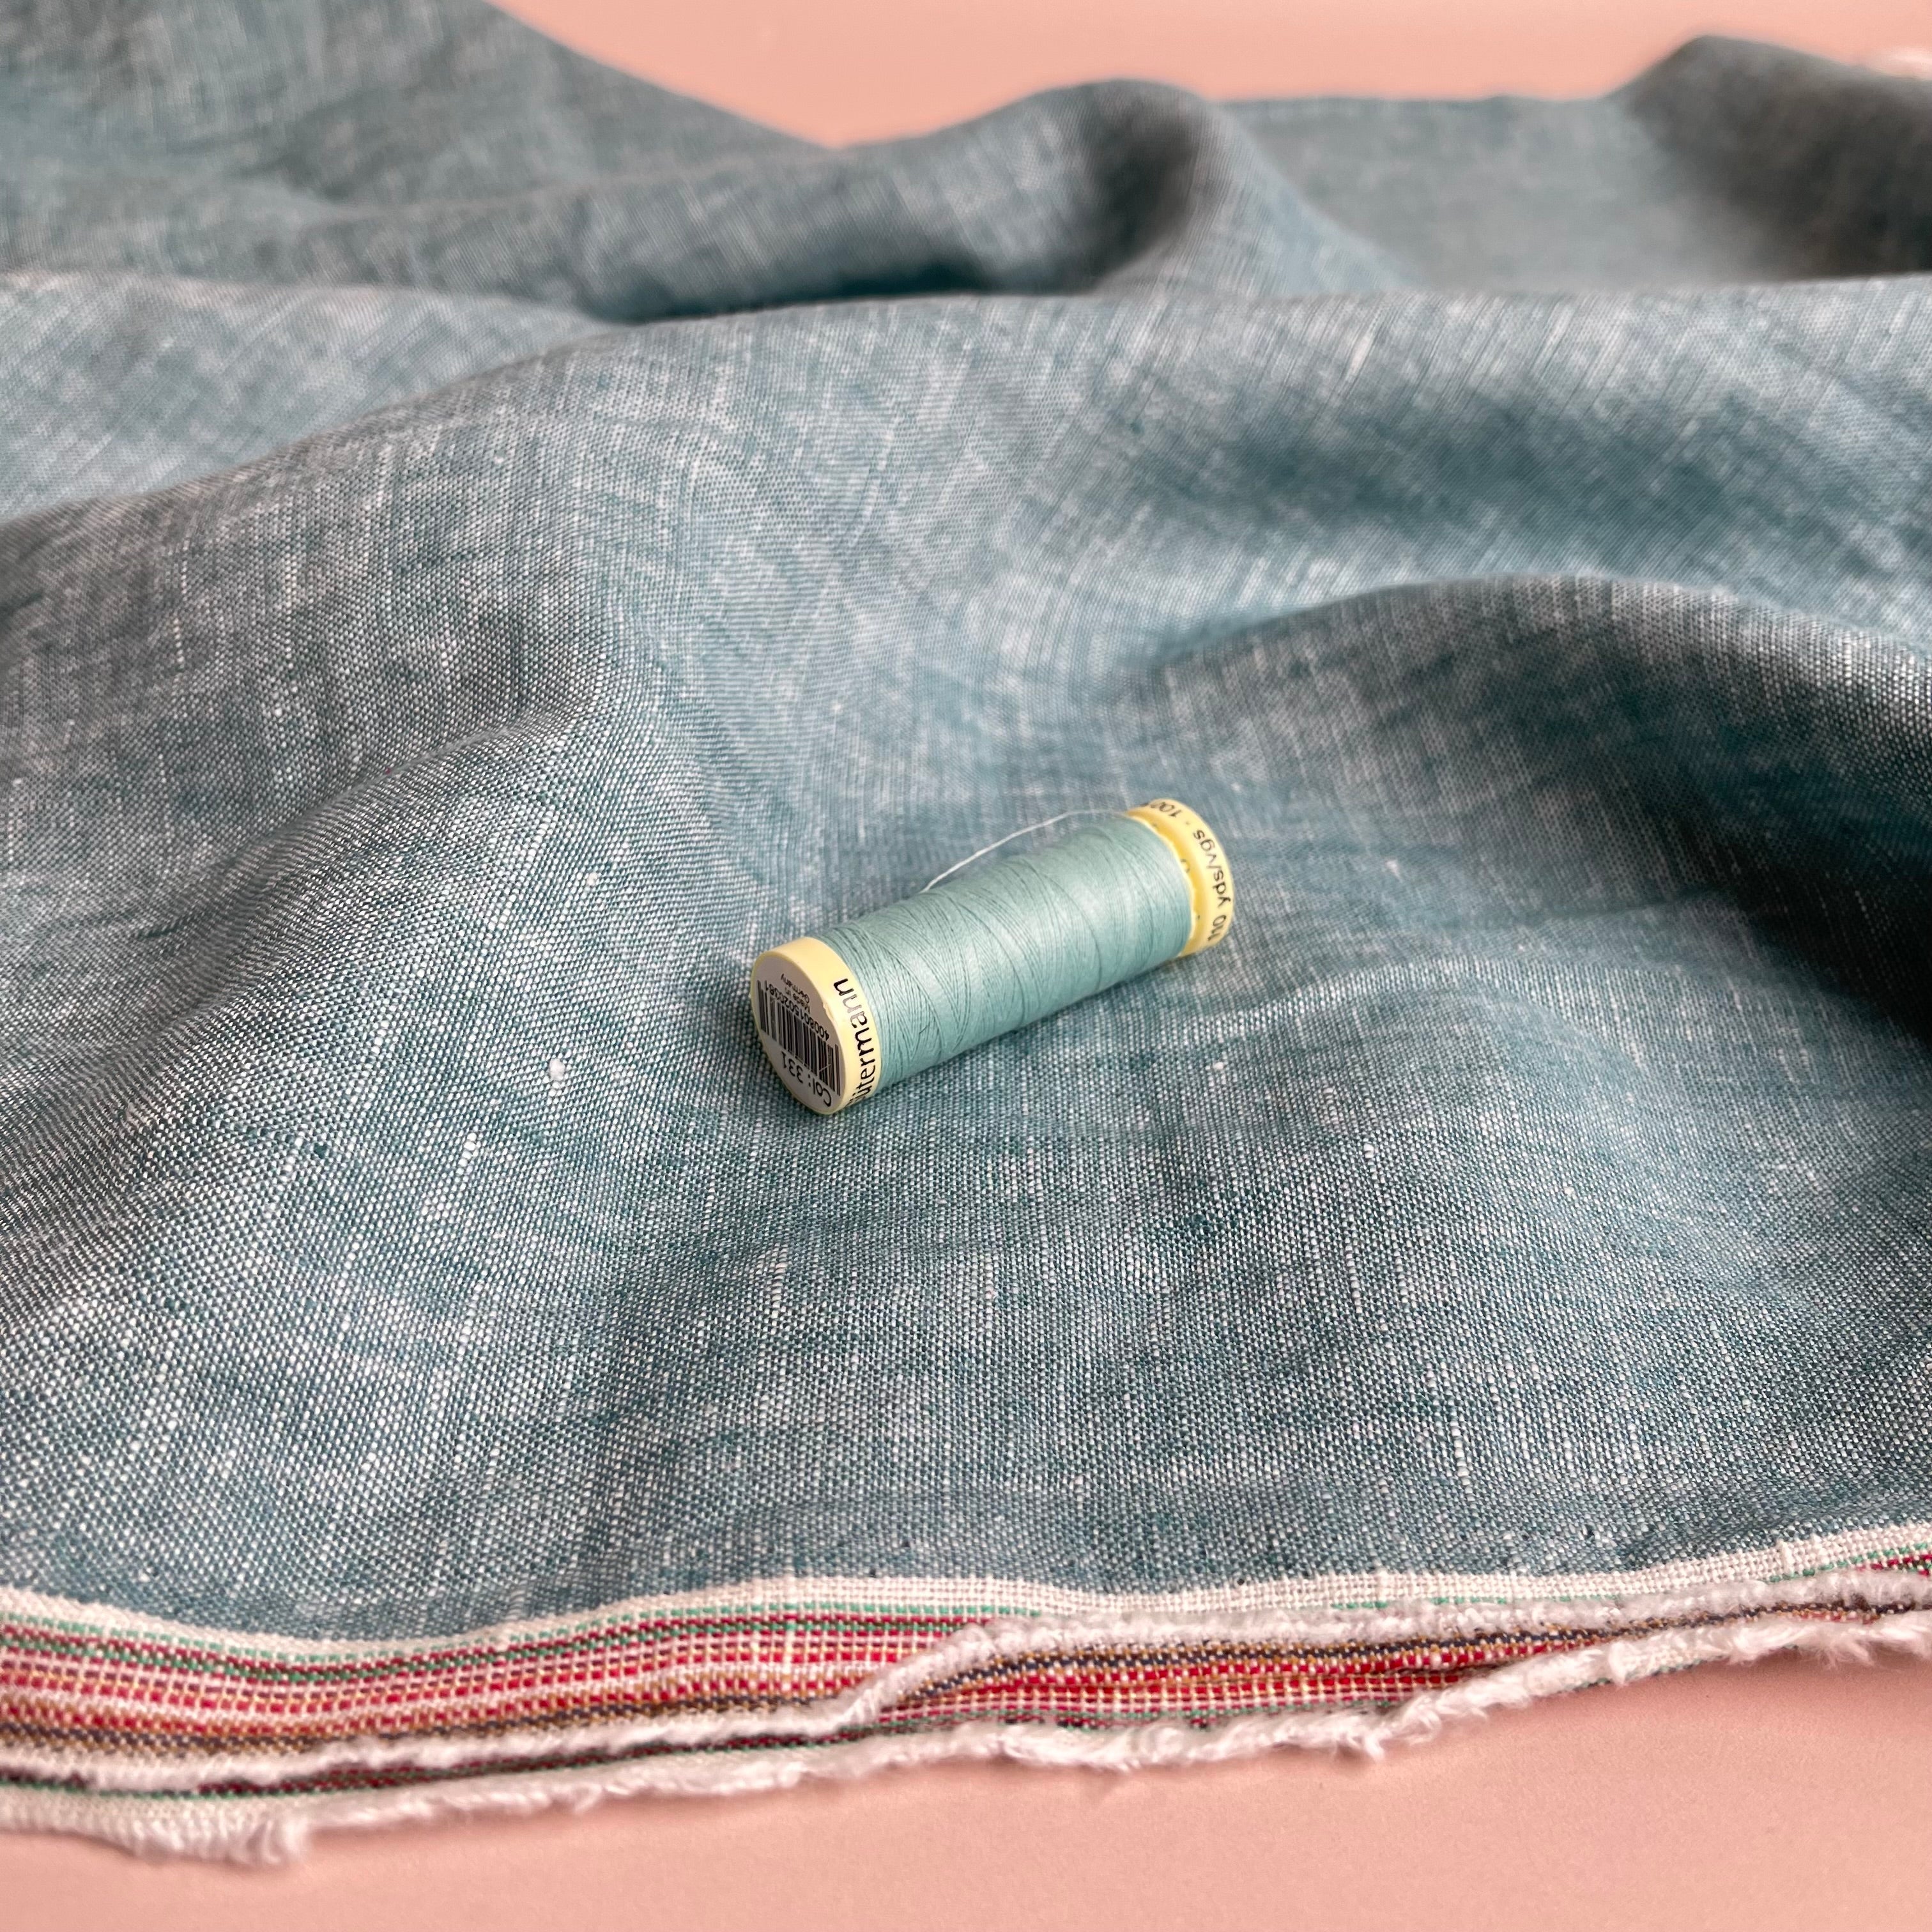 REMNANT 1.52 Metres - Yarn Dyed Pure Linen Fabric in Mineral Blue